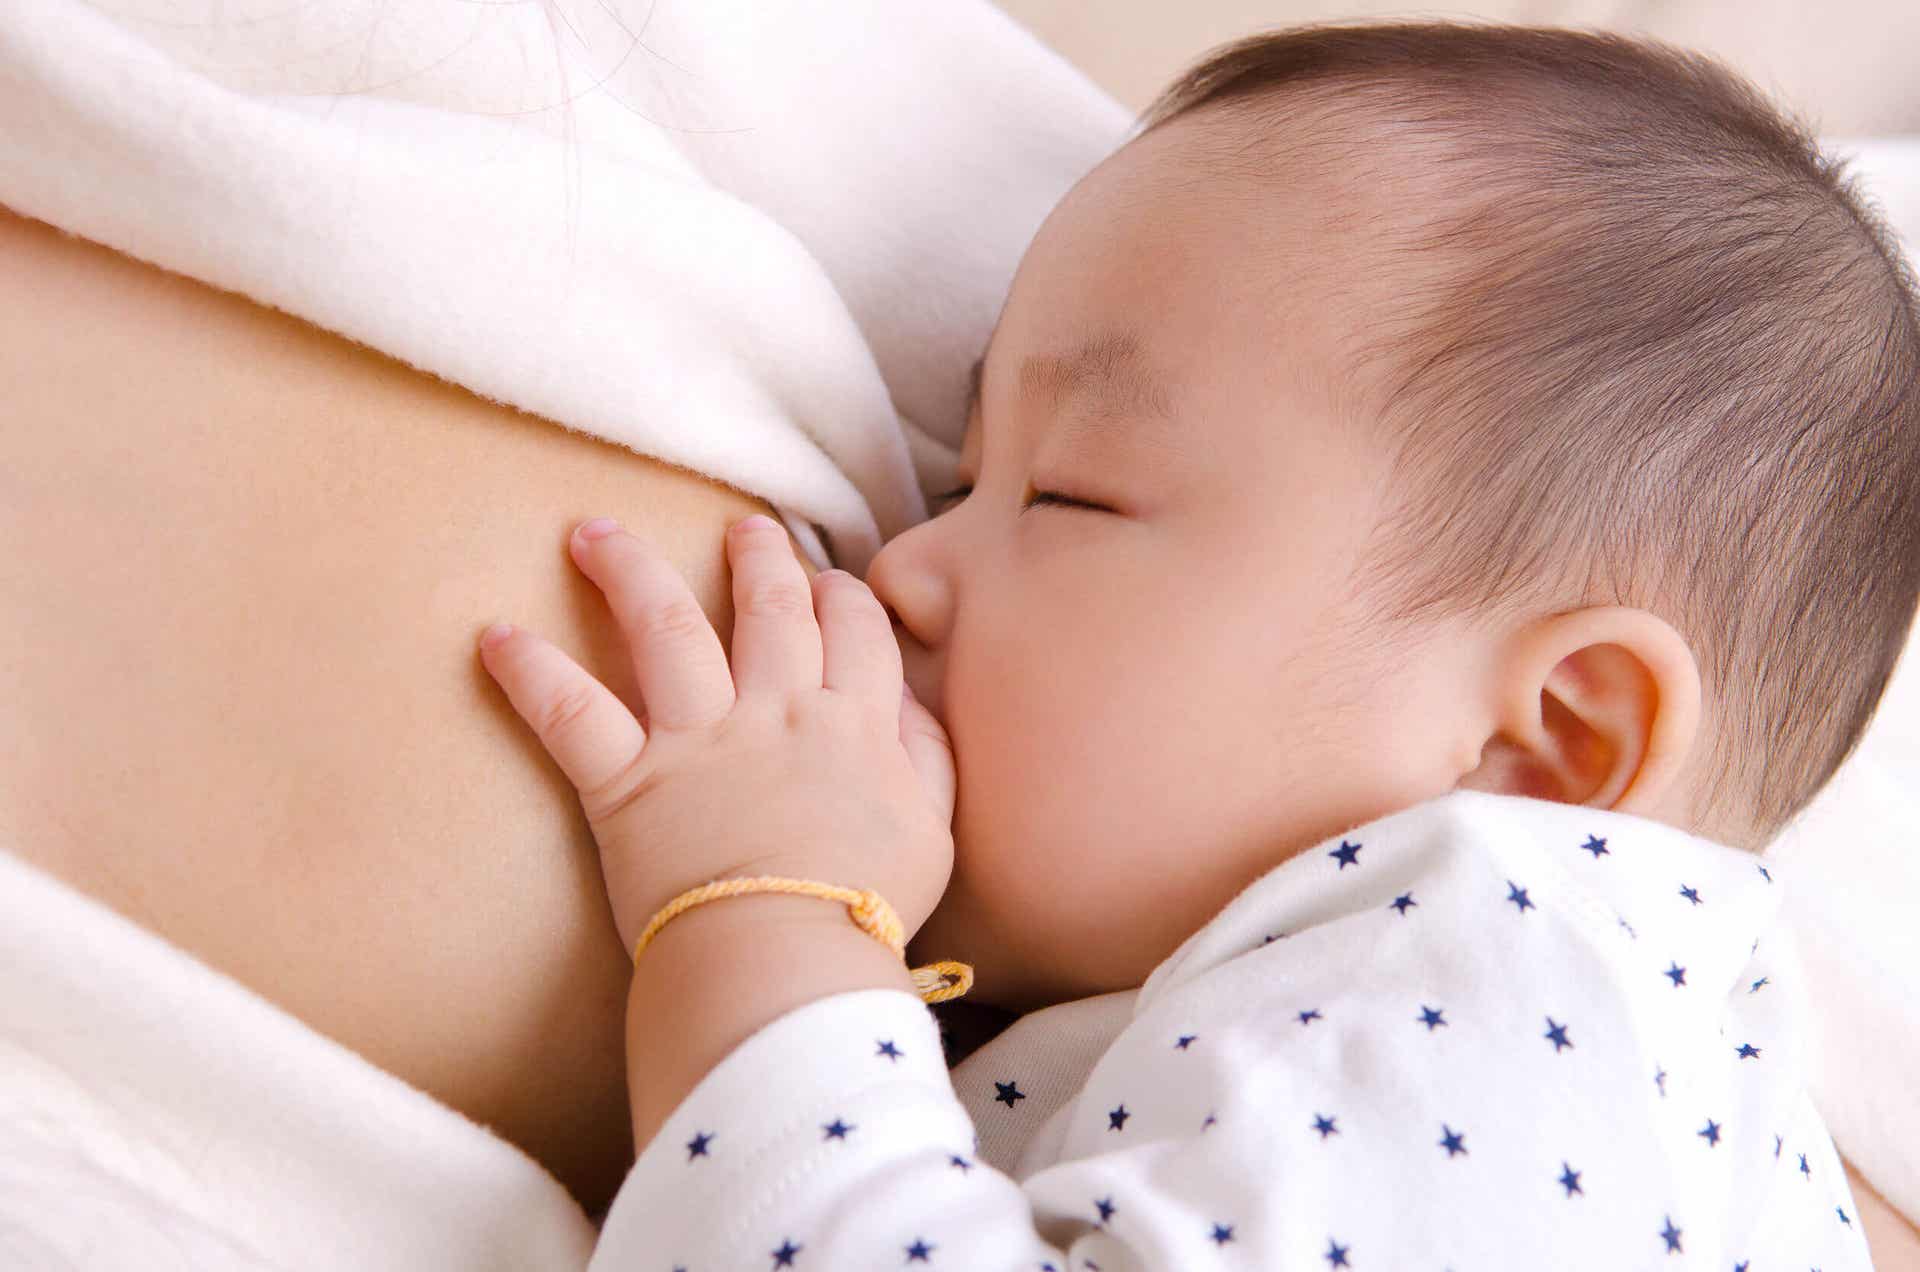 A baby suckling at its mother's breast.